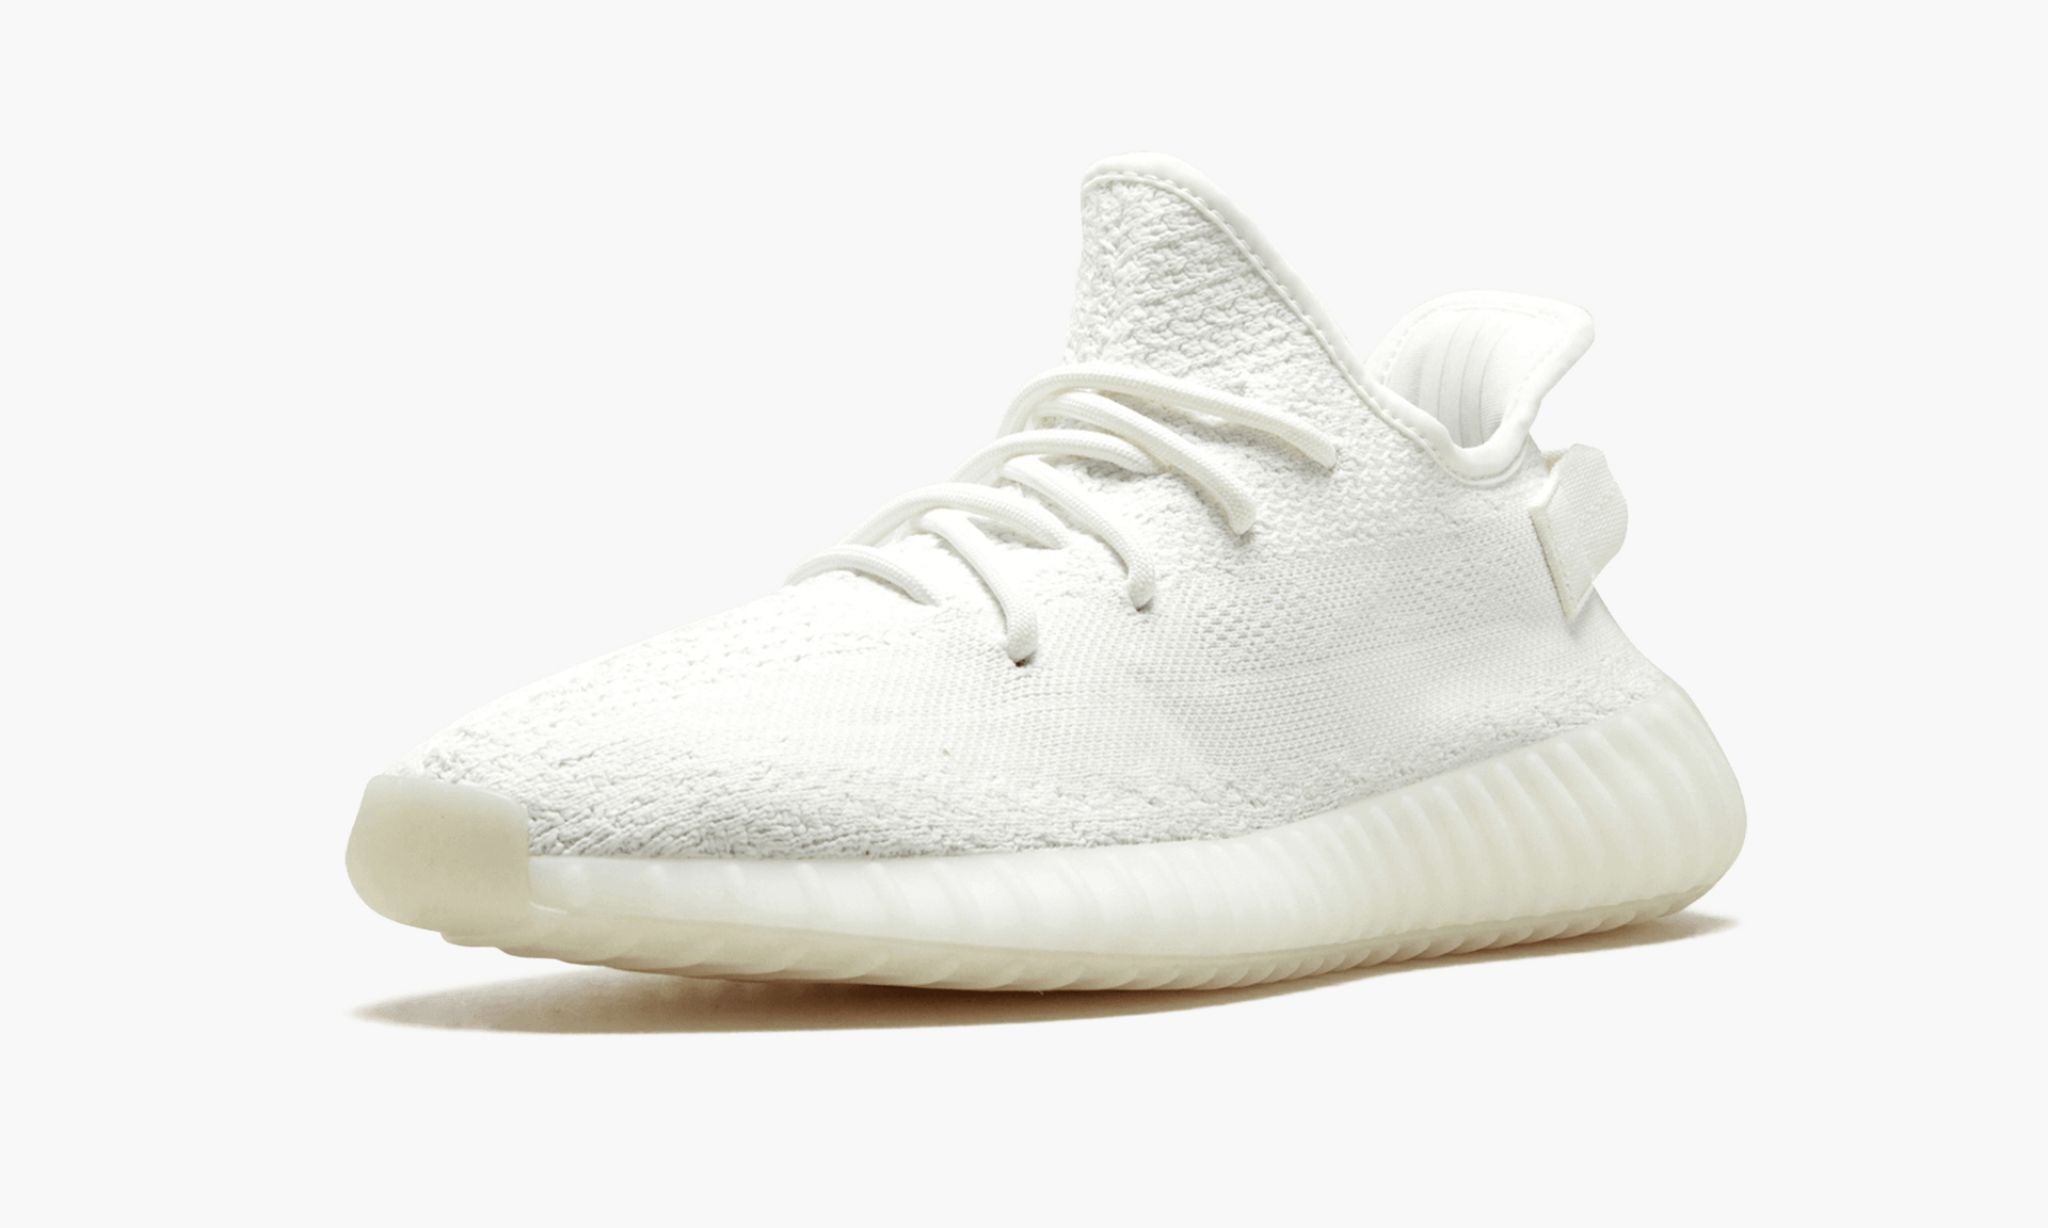 The adidas Yeezy Boost 350 V2 "Triple White